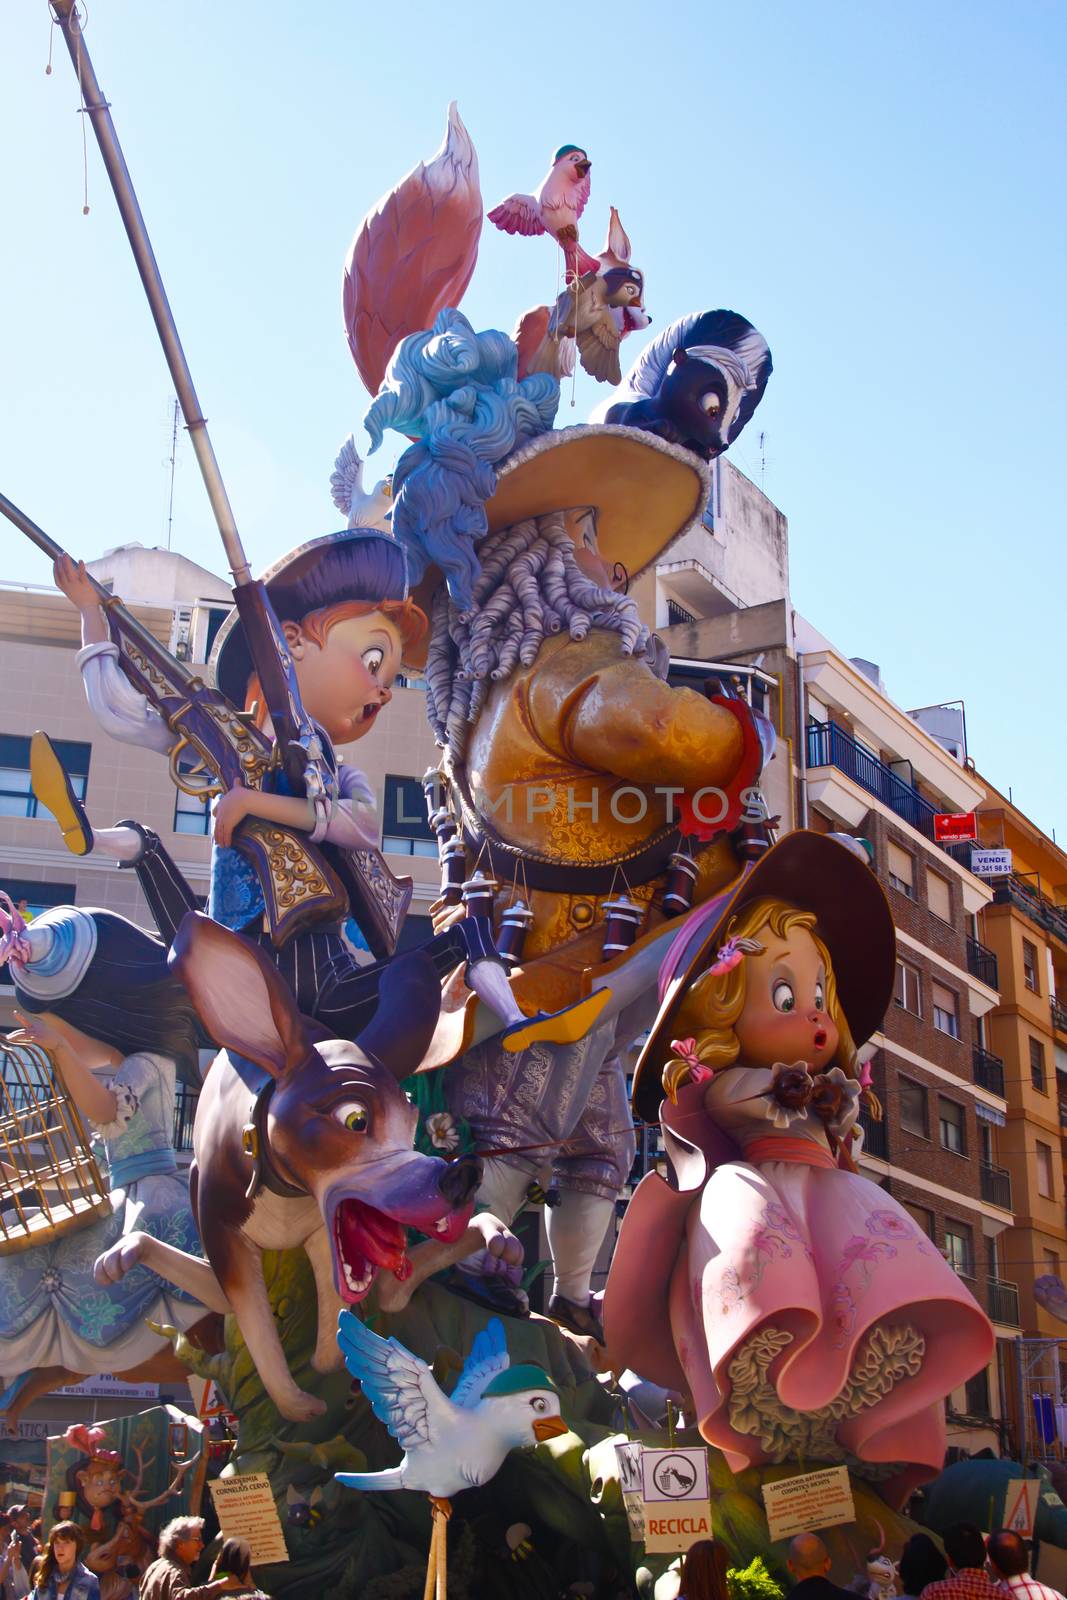 Valencia, Spain - march 19:  Las Fallas is an internationally known traditional fire celebration in praise of Saint Joseph in Valencia, Spain on march 19, 2011.